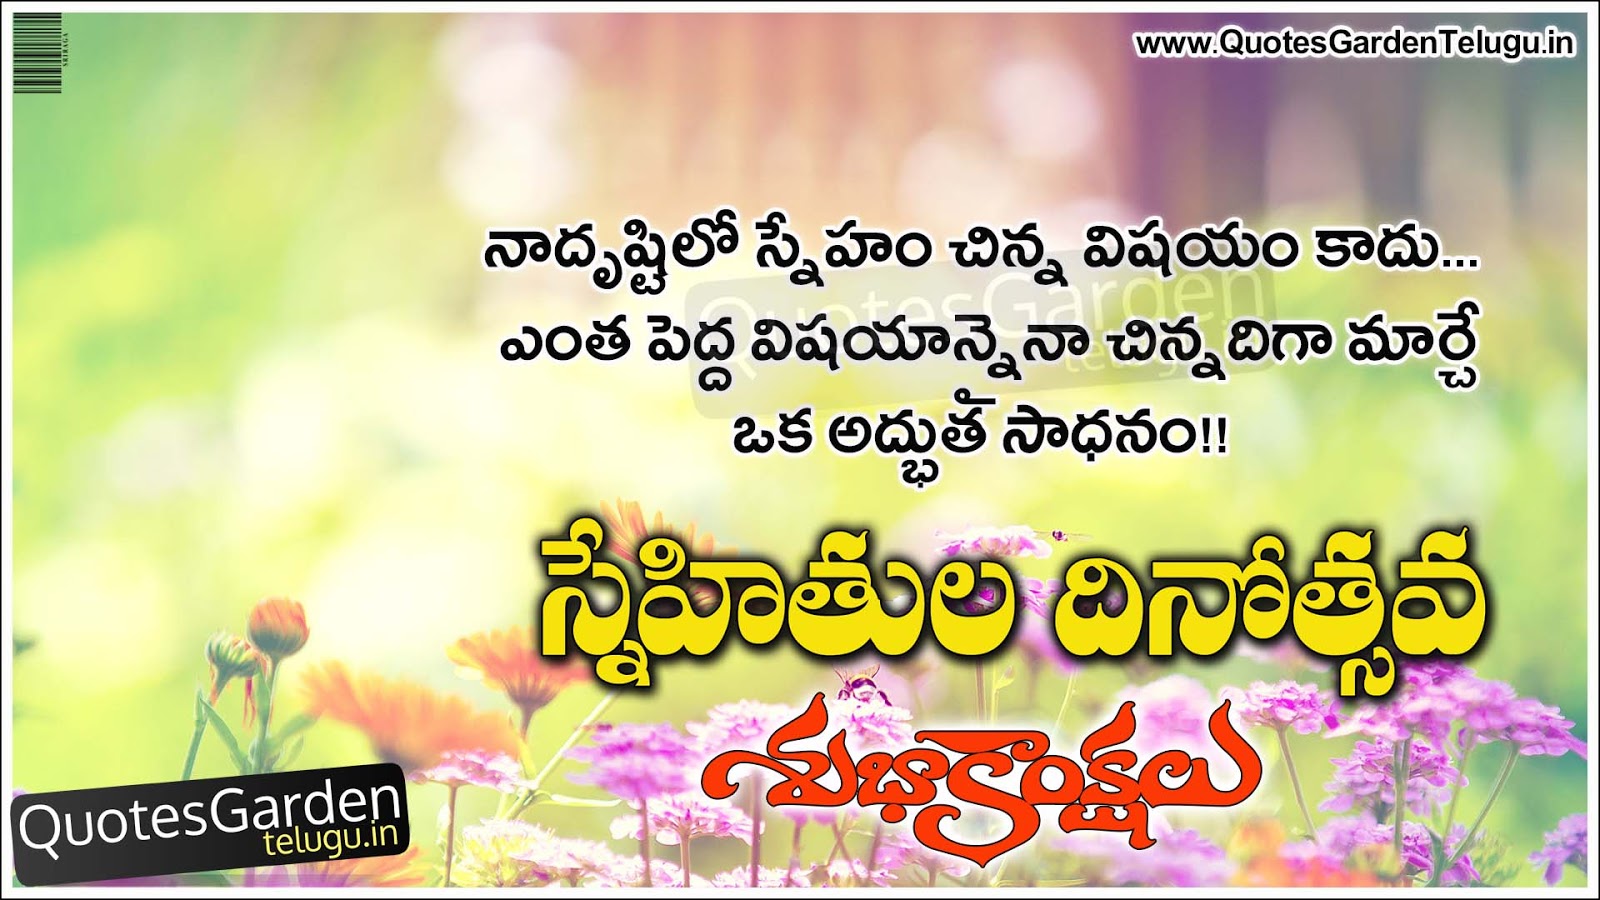 happy Friendship day 2016 quotes greetings in telugu | QUOTES ...